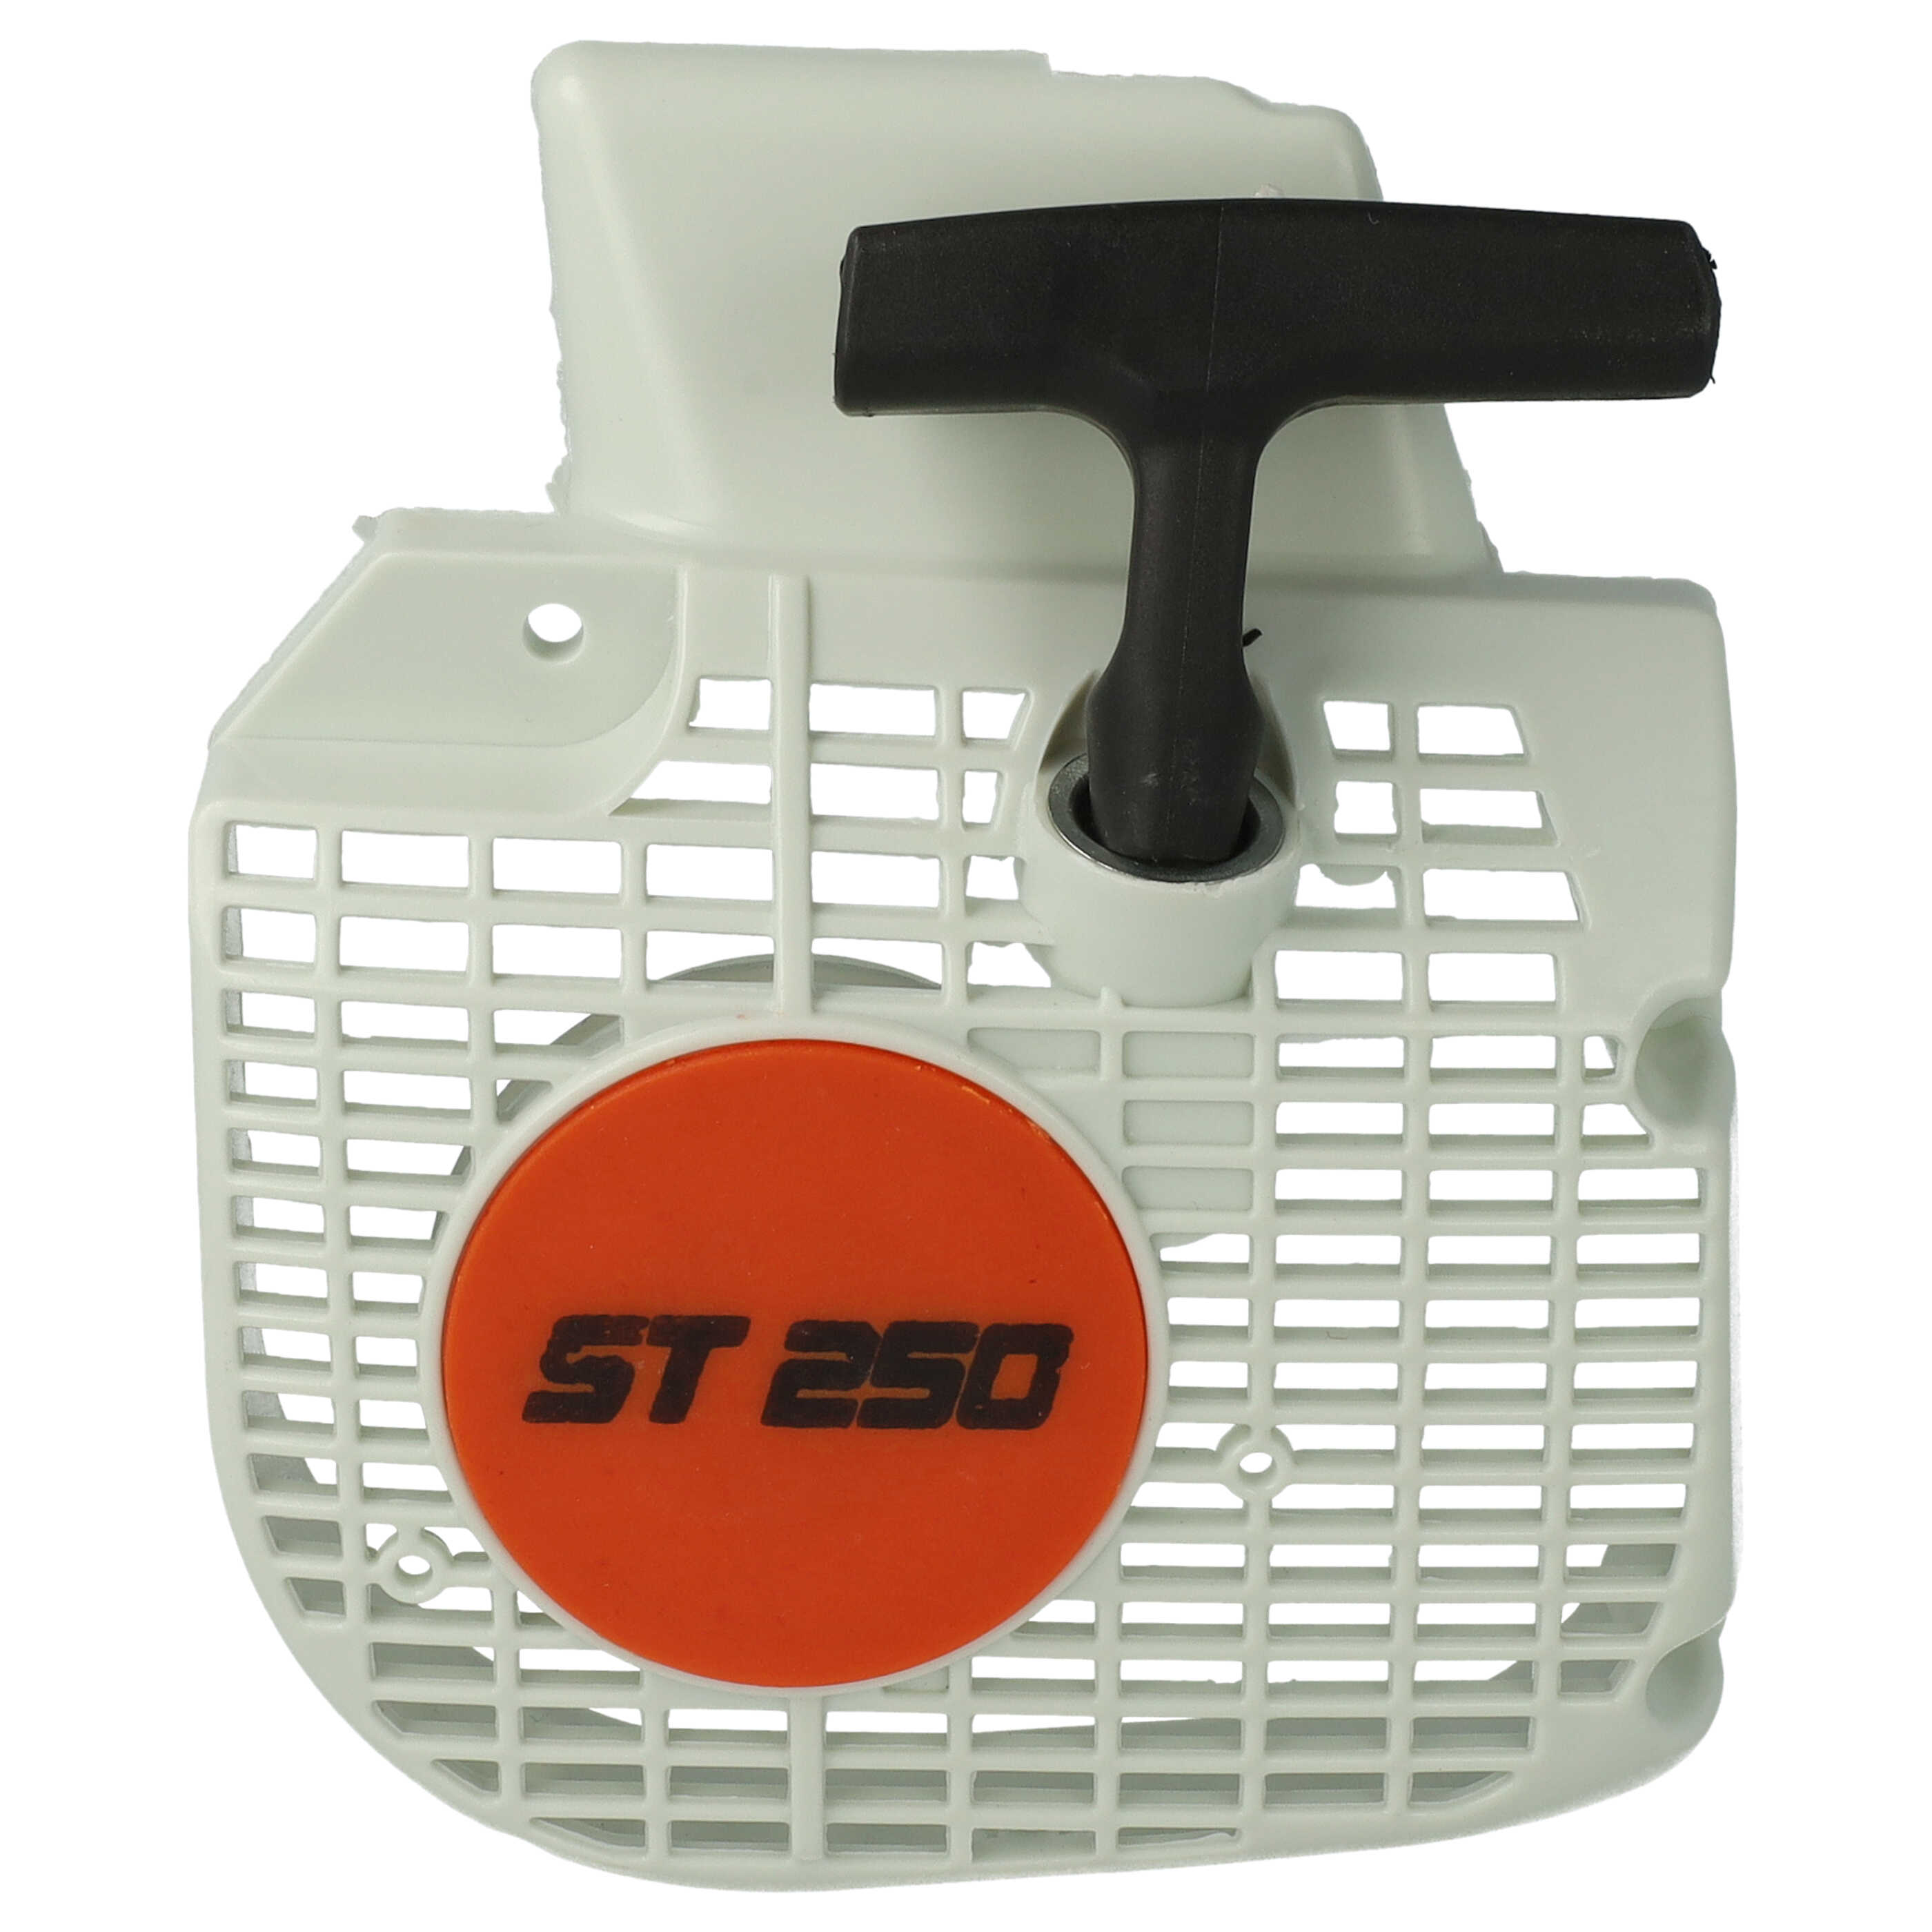 Recoil Starter as Replacement for Stihl 1123-080-1802 suitable for Stihl Power Saw - 16.7 x 13.8 x 3.8 cm